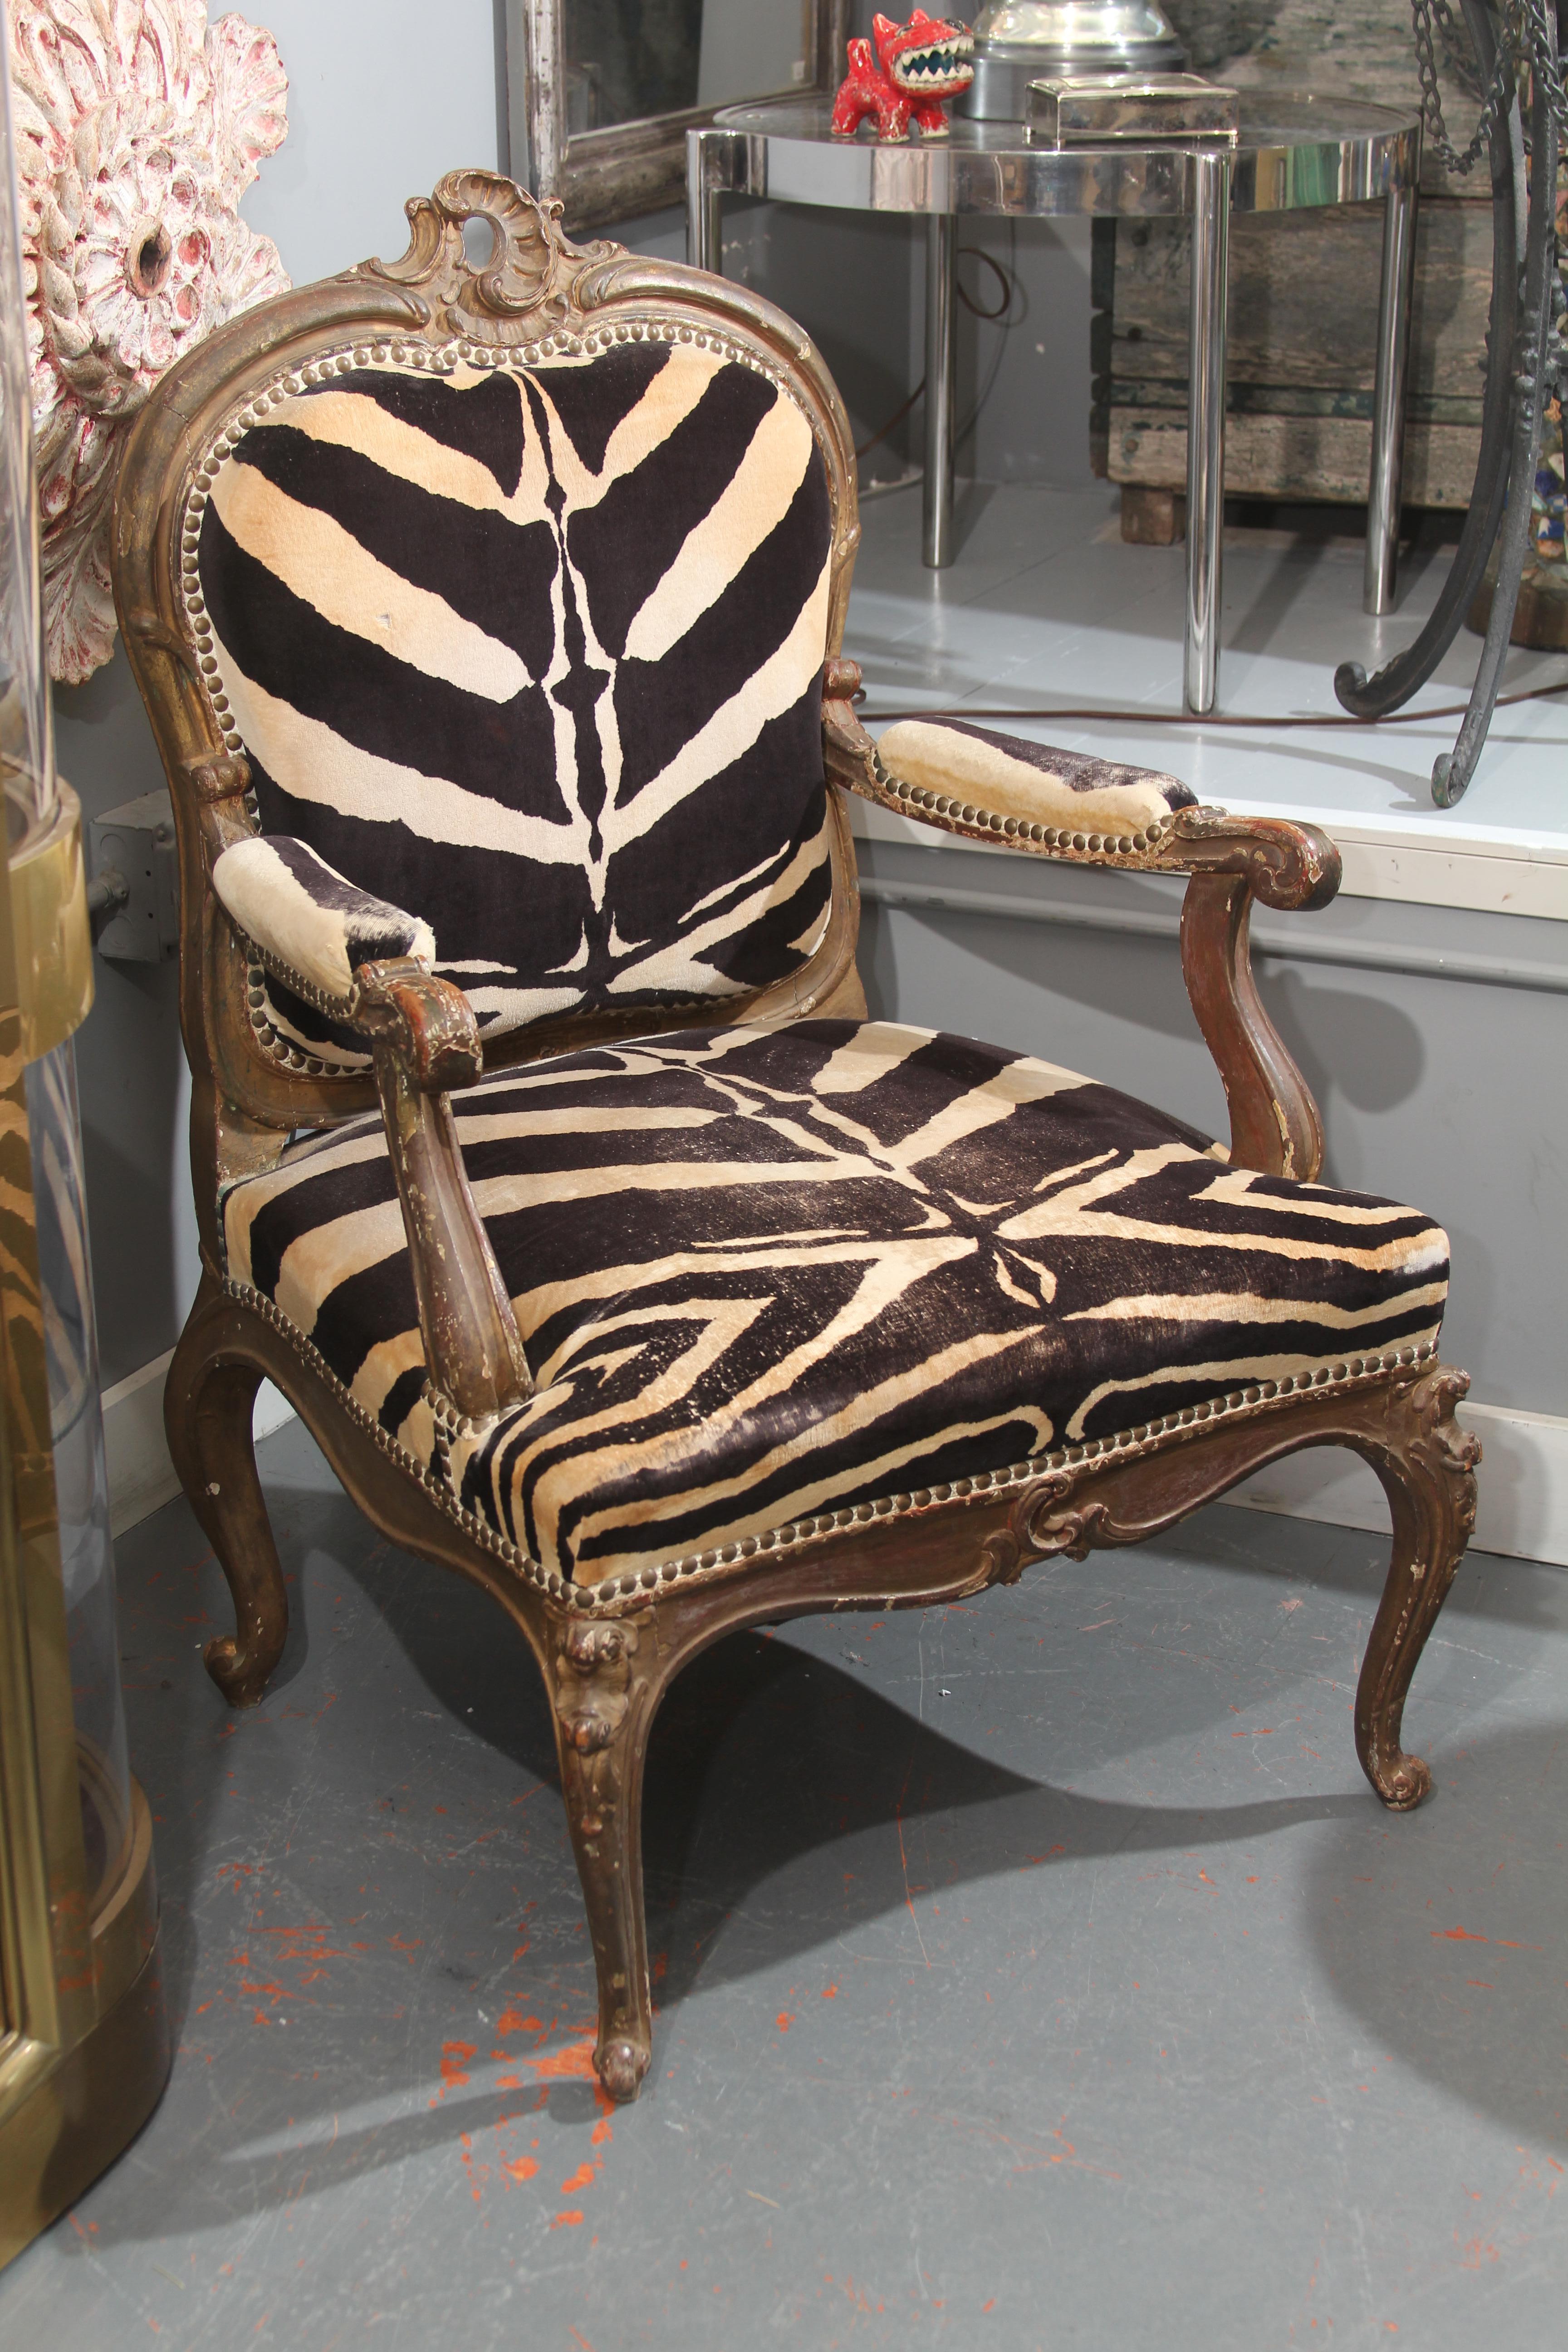 Curvy 19th century antique carved giltwood Italian chair upholstered in beautifully worn cotton velvet. Sturdy and comfortable, this is a very versatile and useable chair for almost any room. The care that was taken for fabric placement is top